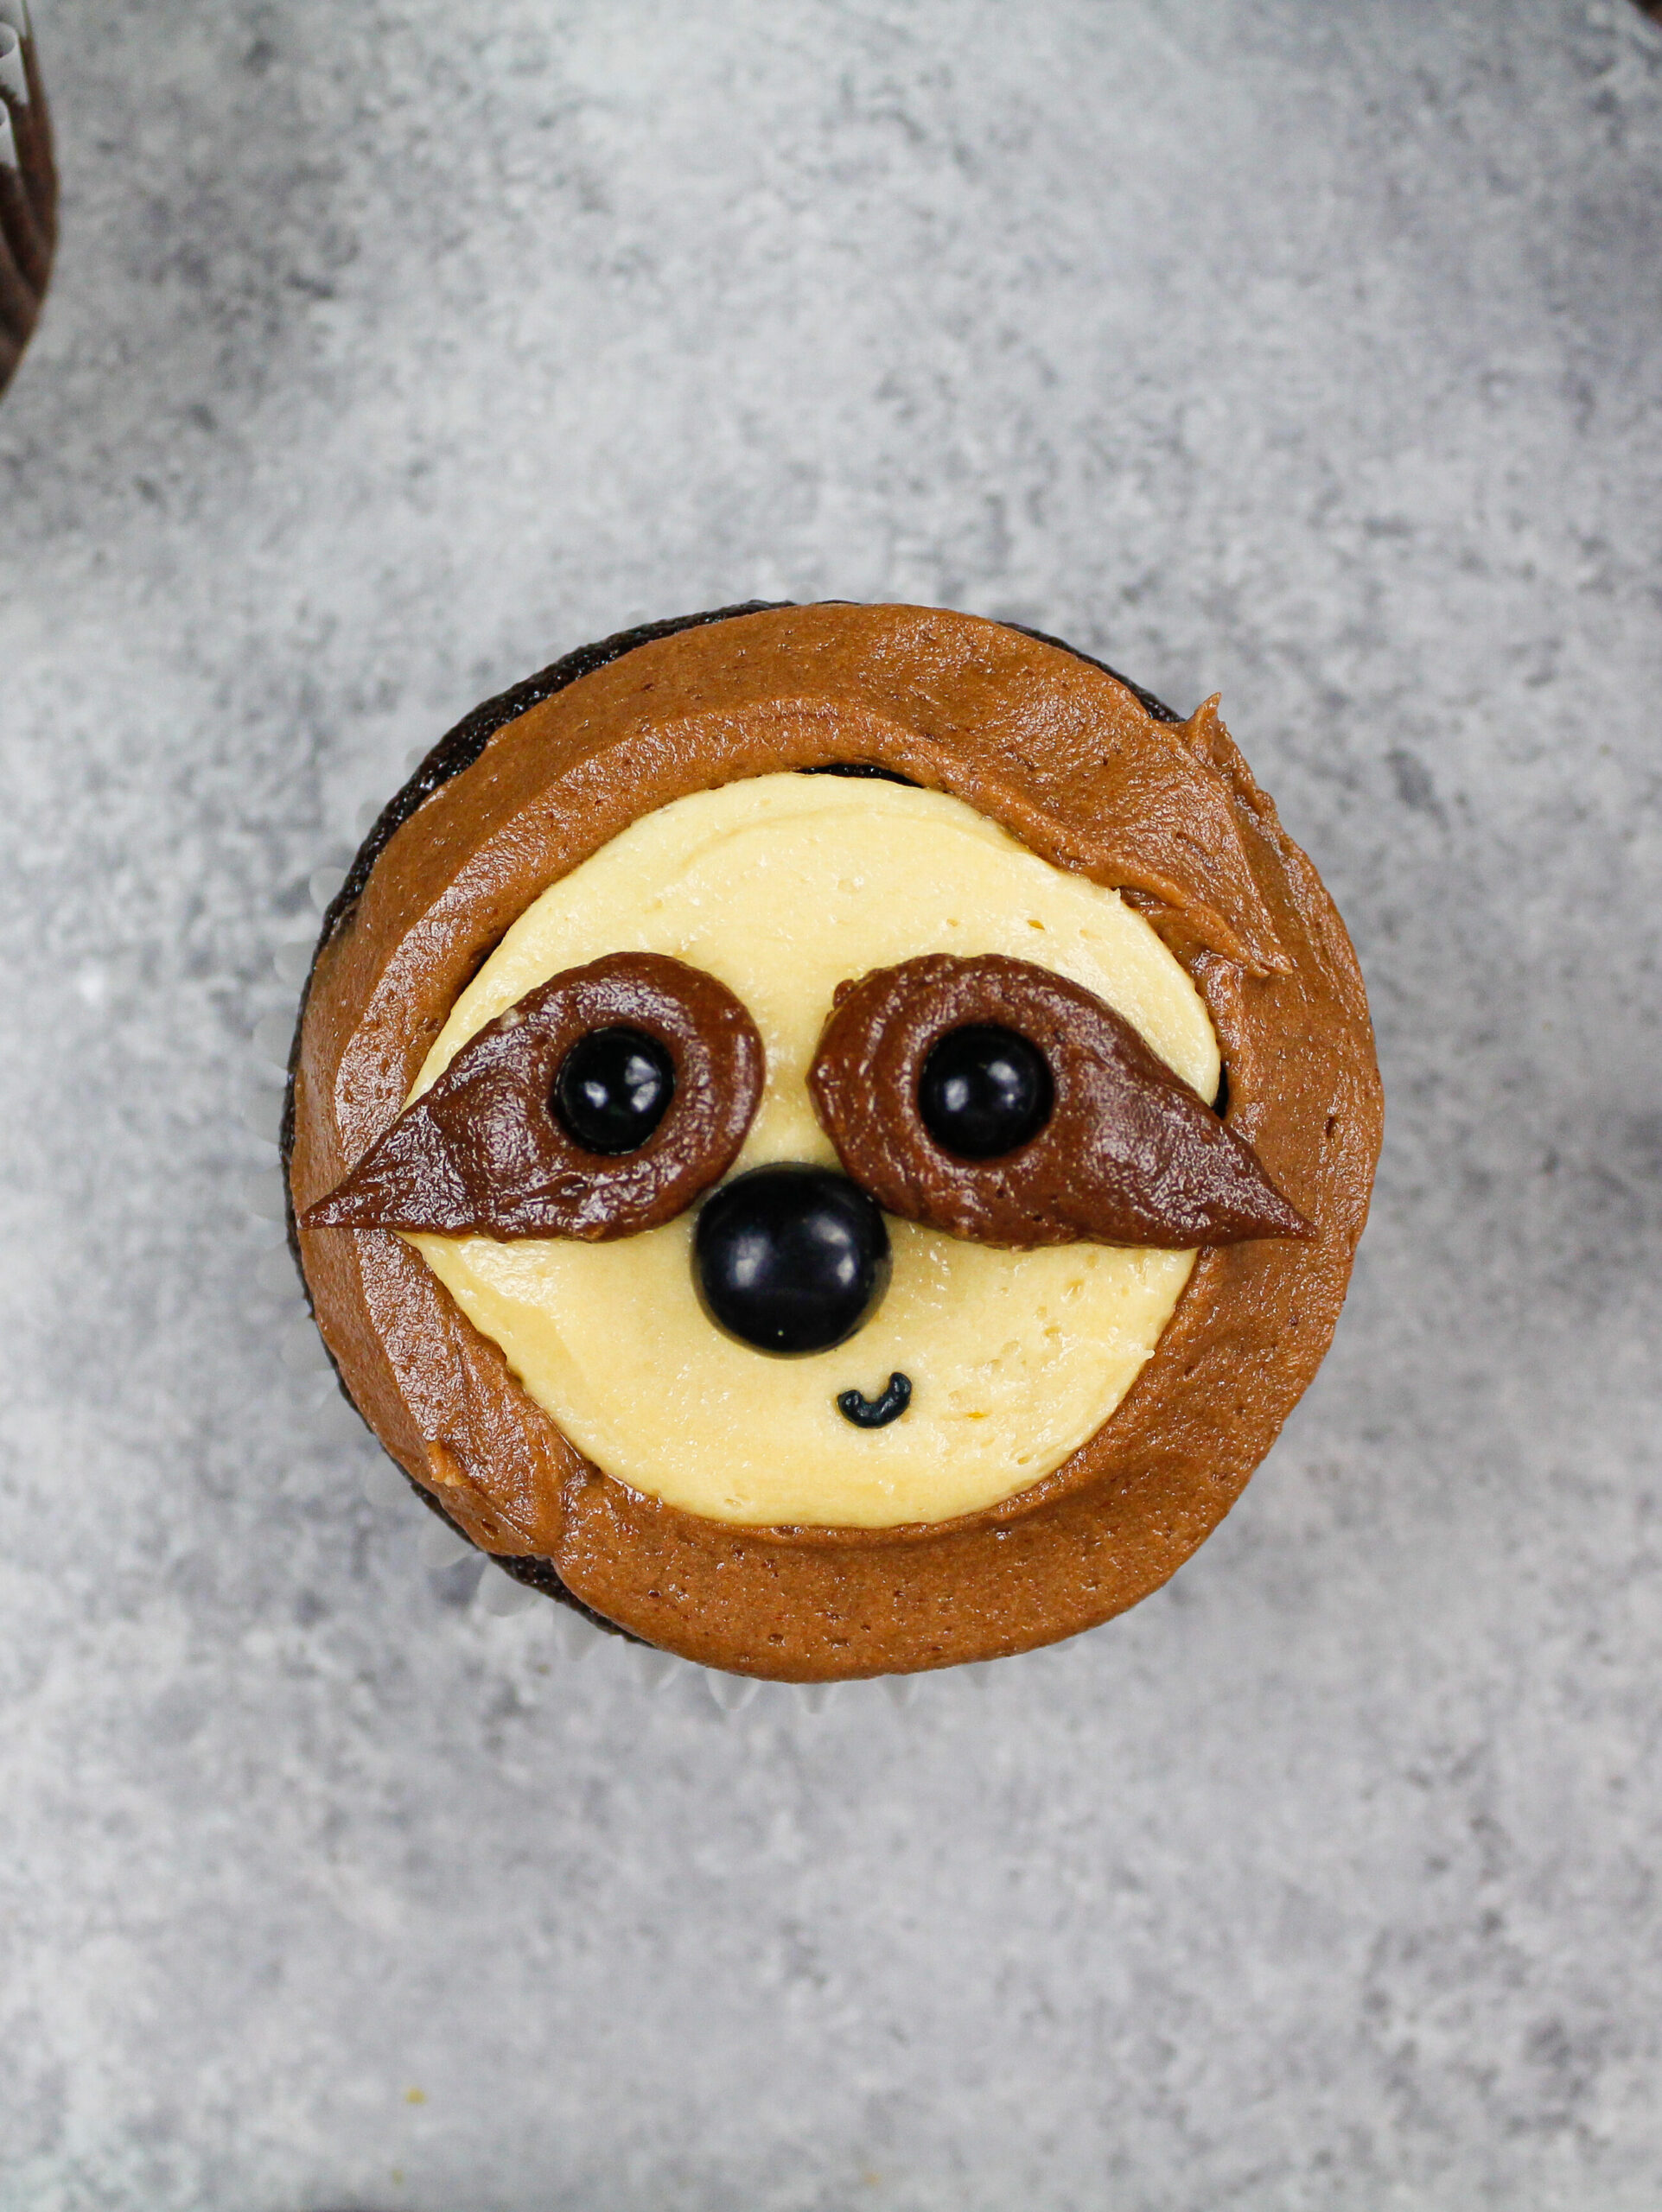 image of an adorable sloth cupcakes made with chocolate cupcake being decorated with chocolate peanut butter frosting